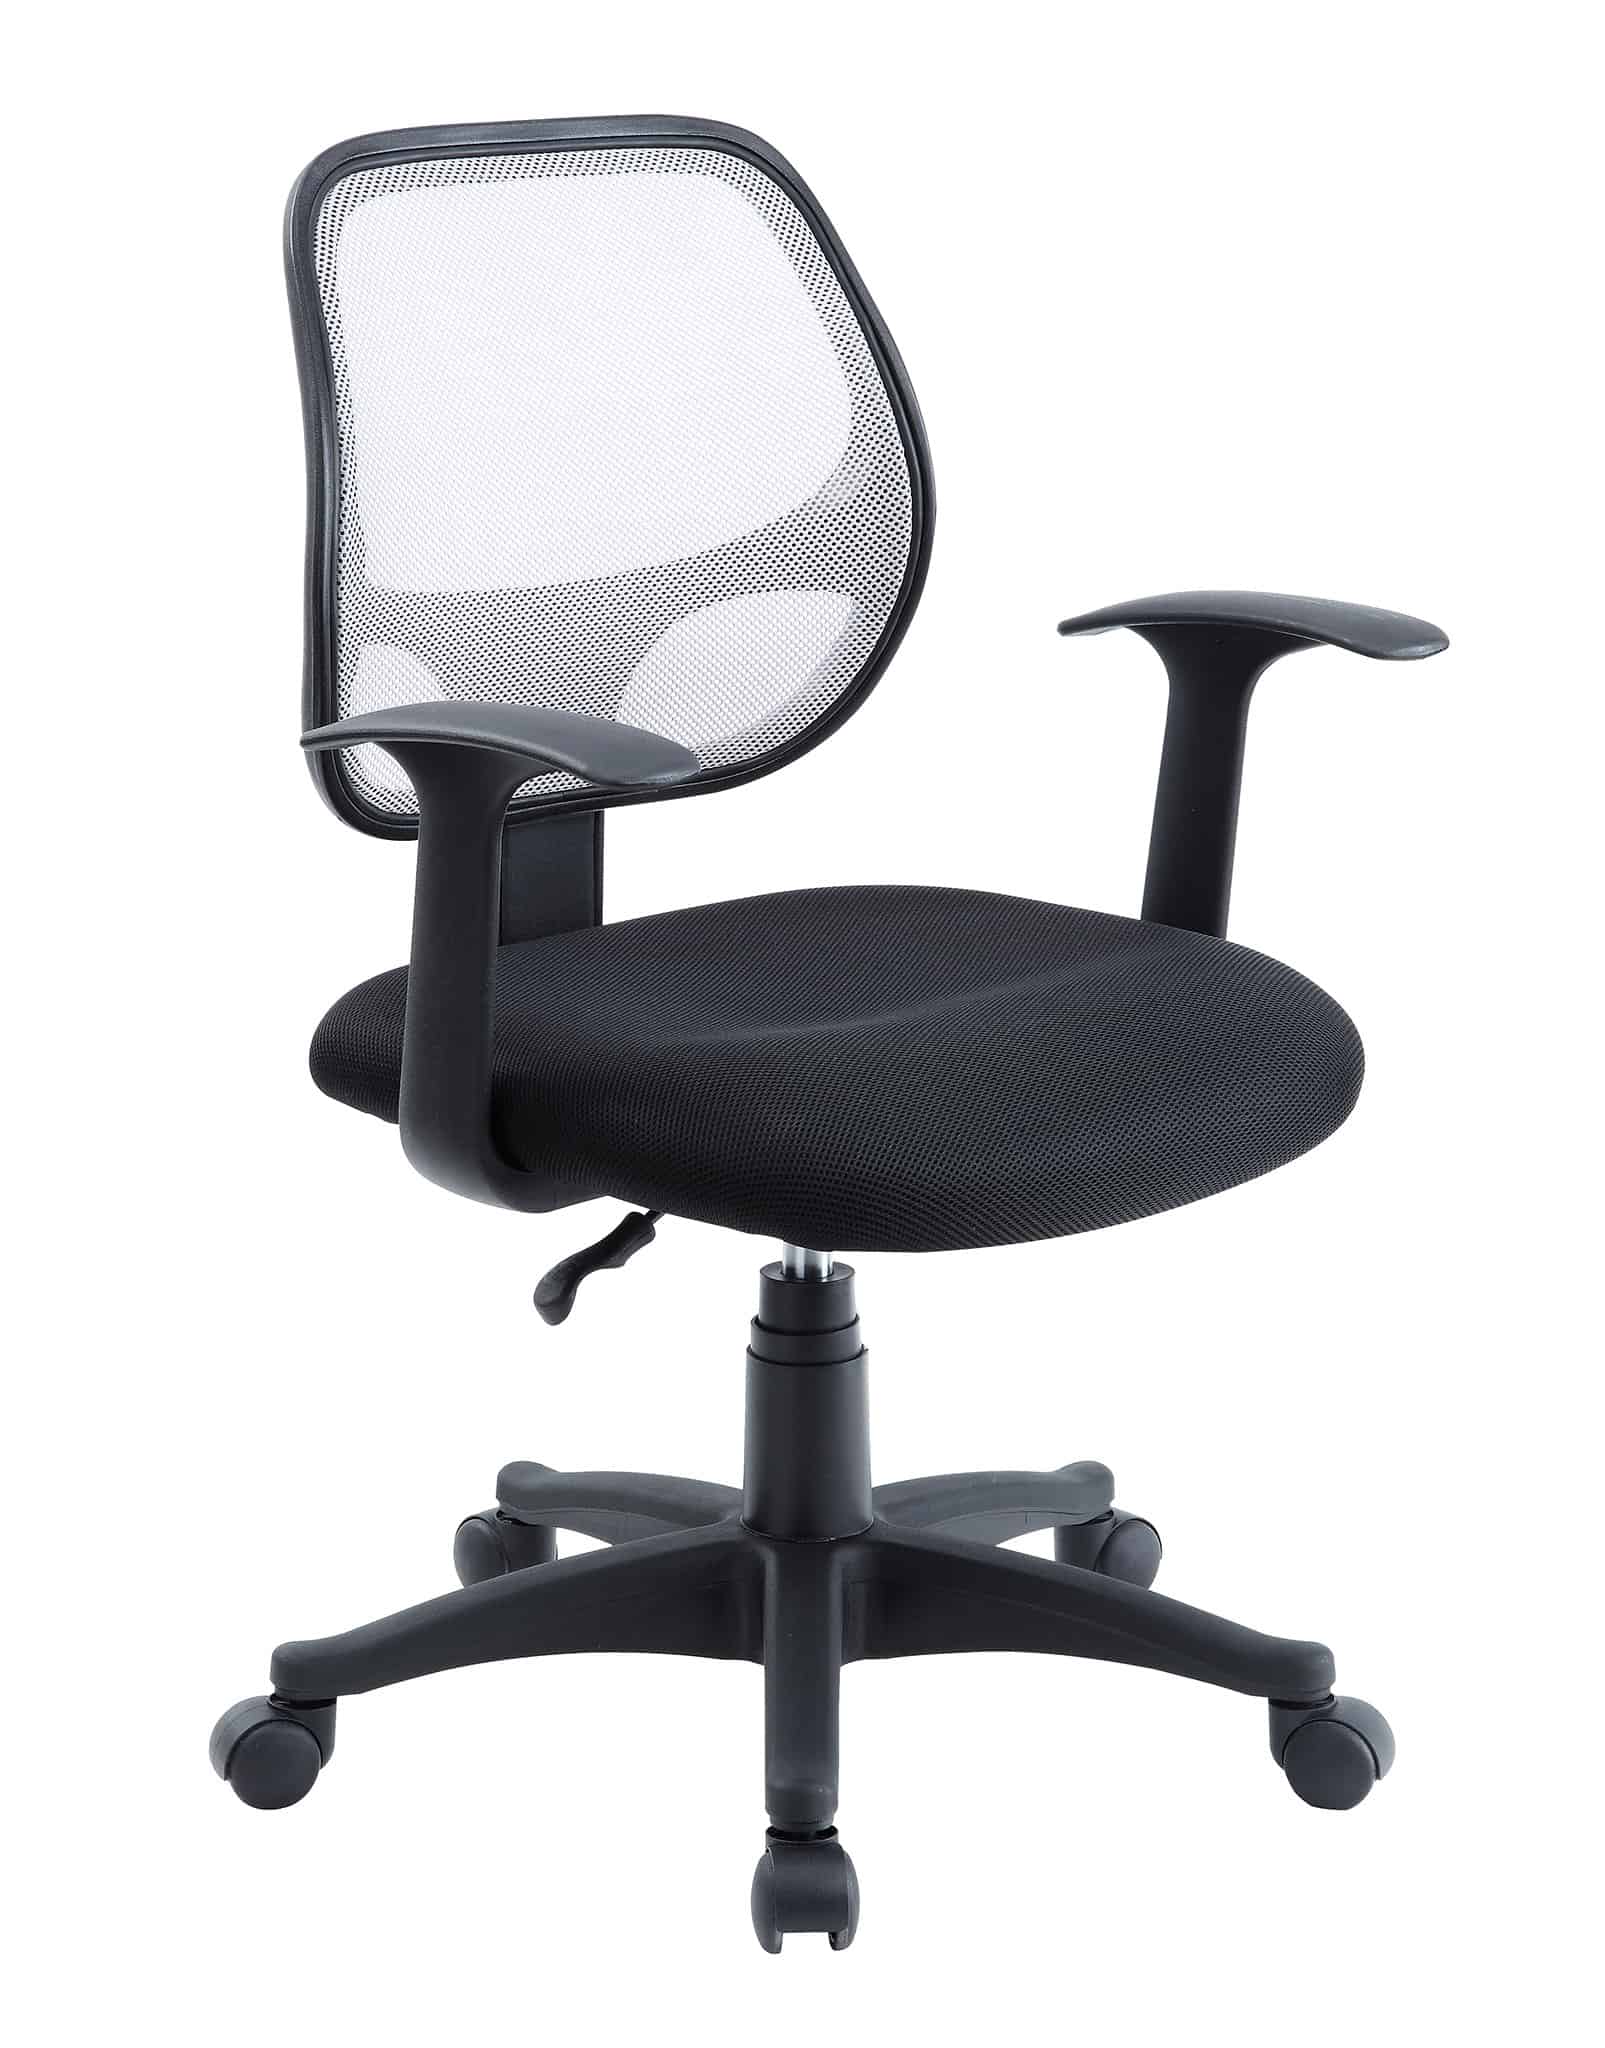 Mainstays Mesh Office Chairs With Arms ONLY $24.62 (Reg $66)